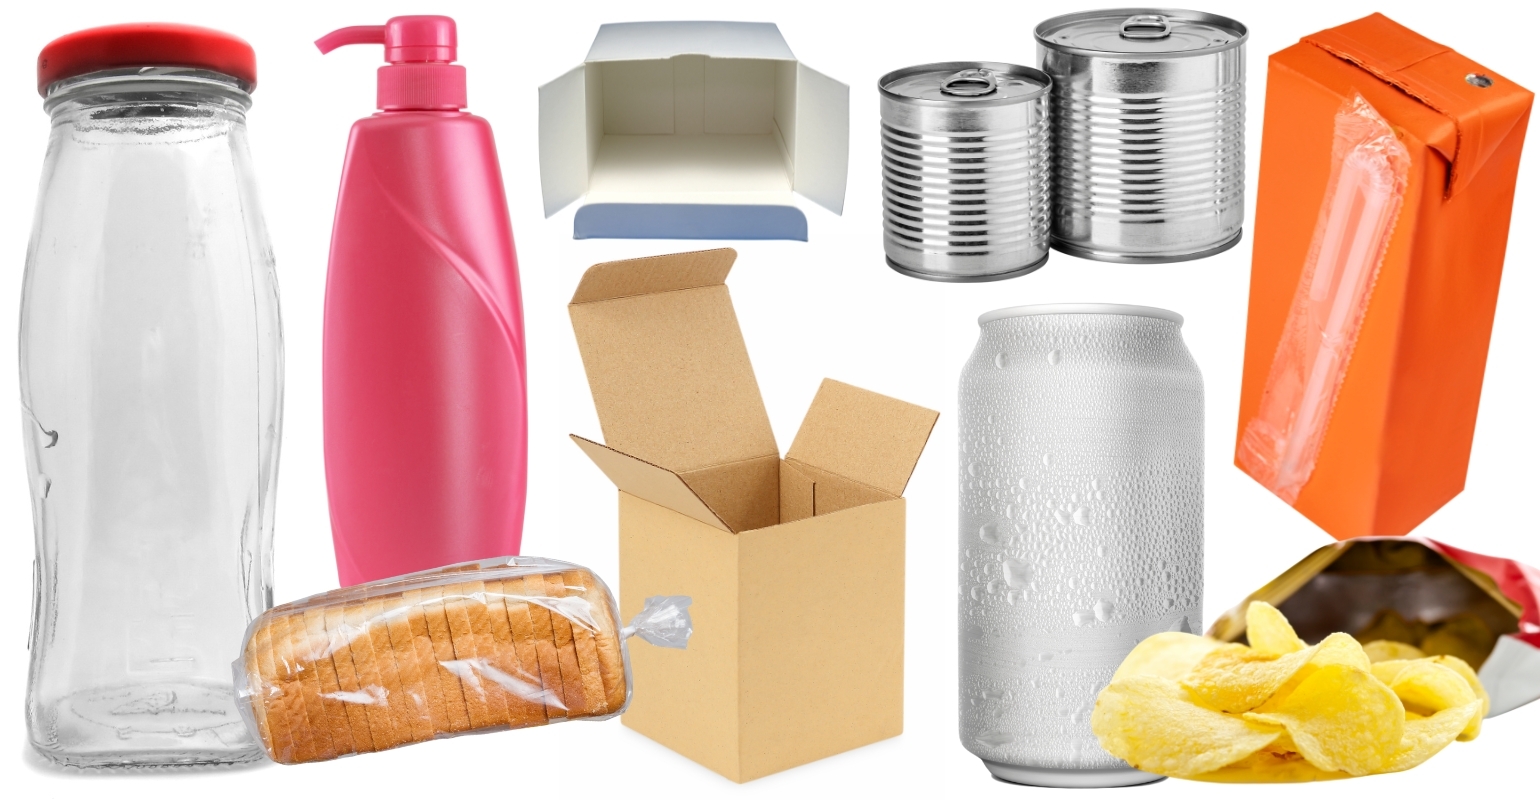 Materials Used for Packaging